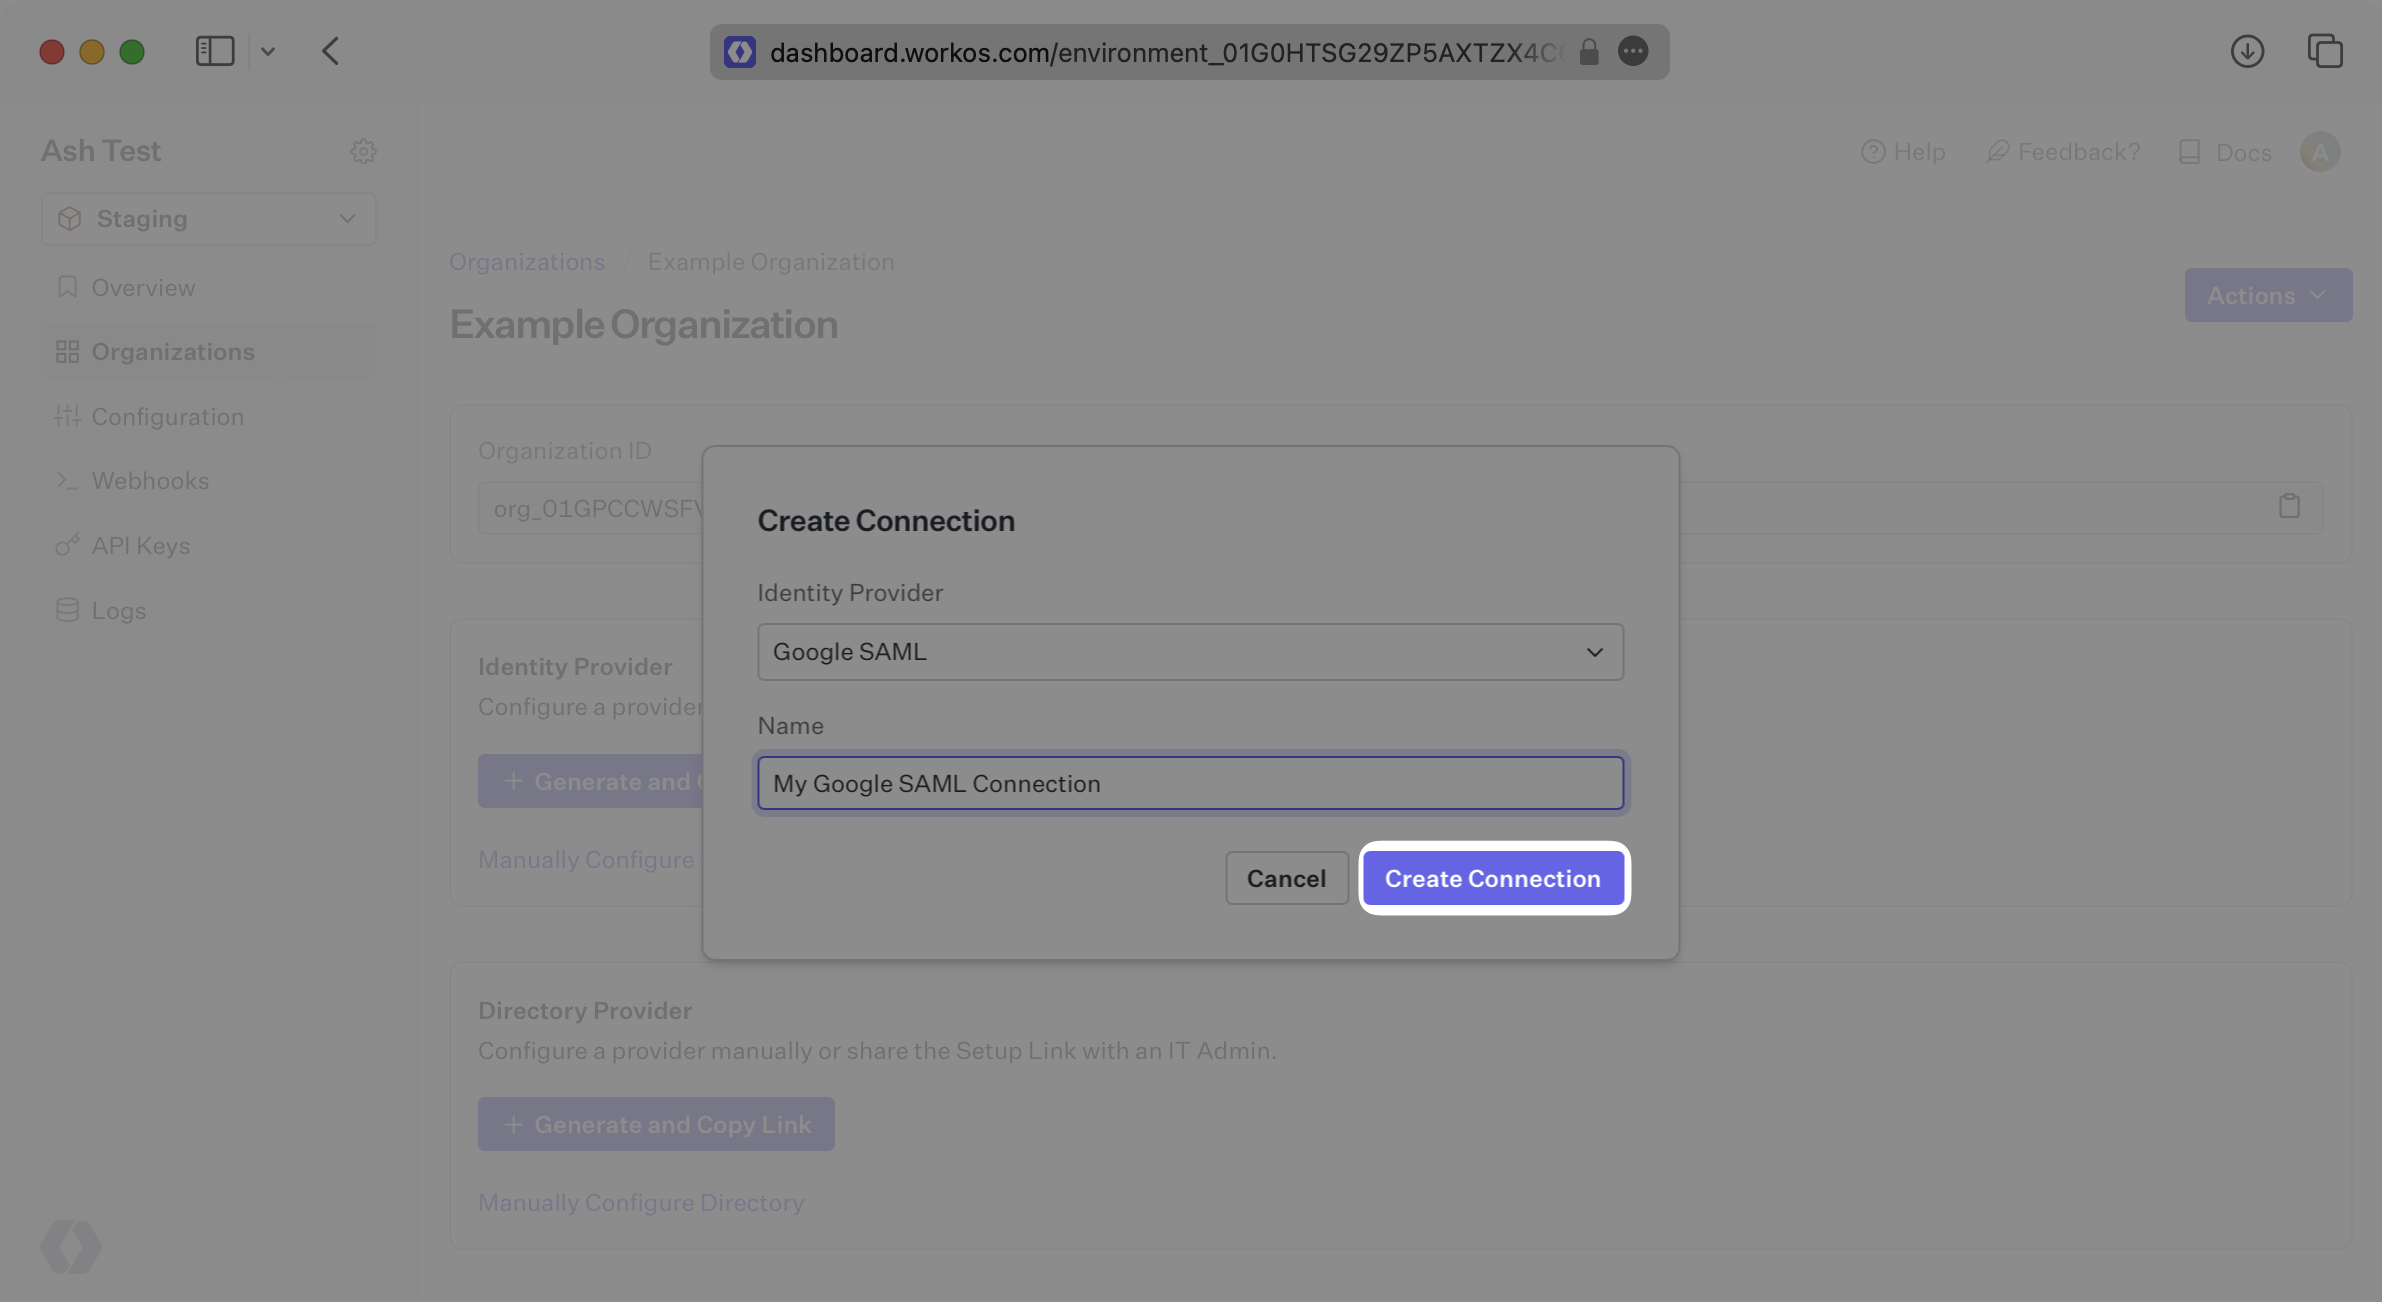 A screenshot showing how to create a connection in the WorkOS Dashboard.